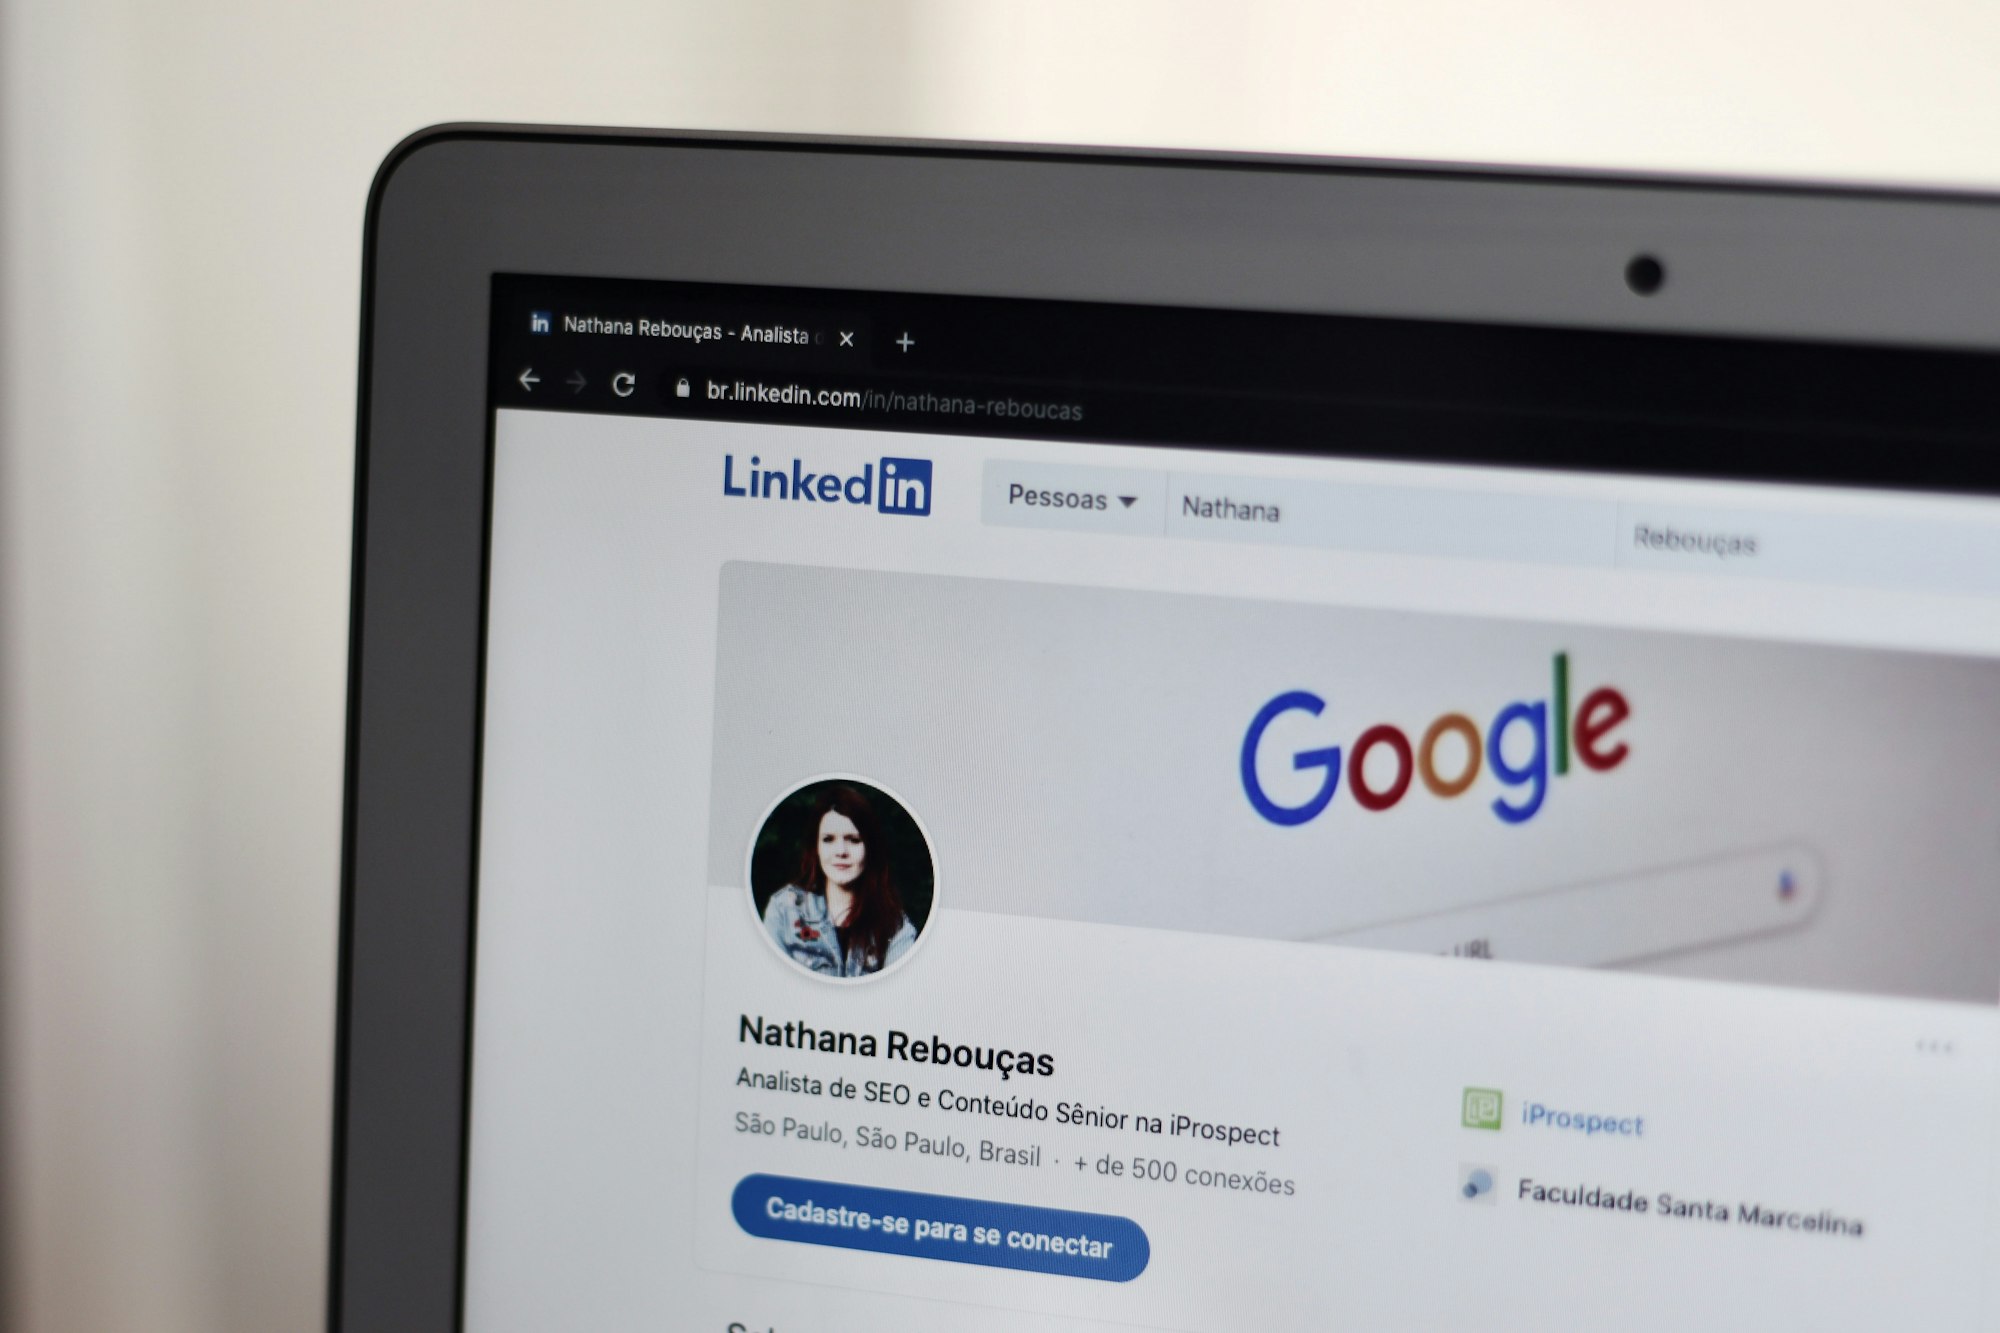 How to View a Profile Anonymously on LinkedIn